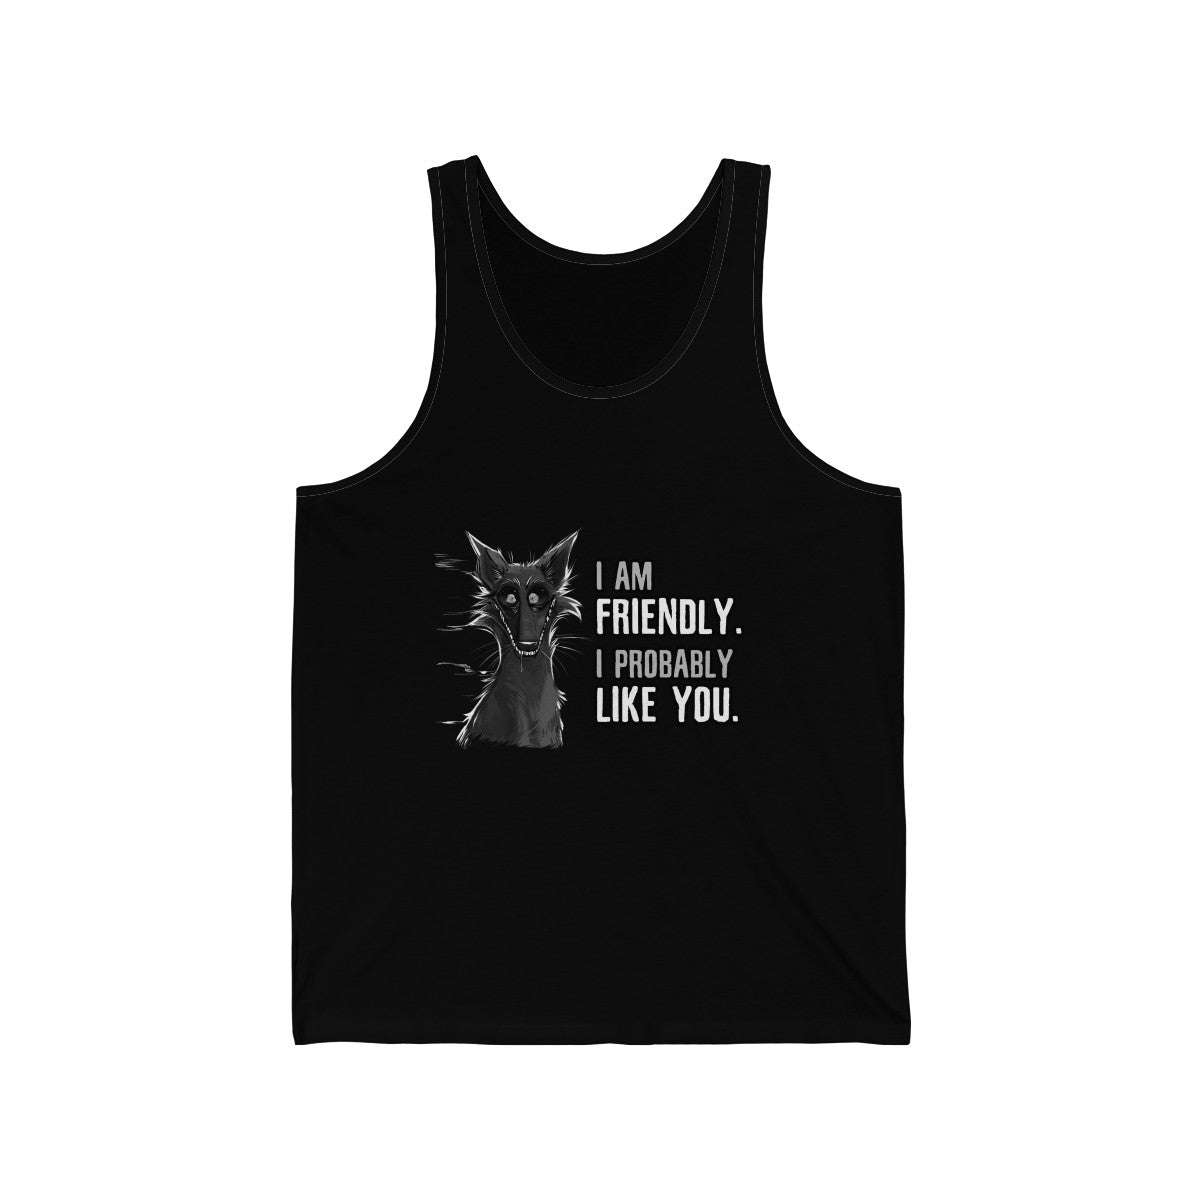 I probably DON'T hate you - Tank Top Tank Top Cyamallo Black XS 